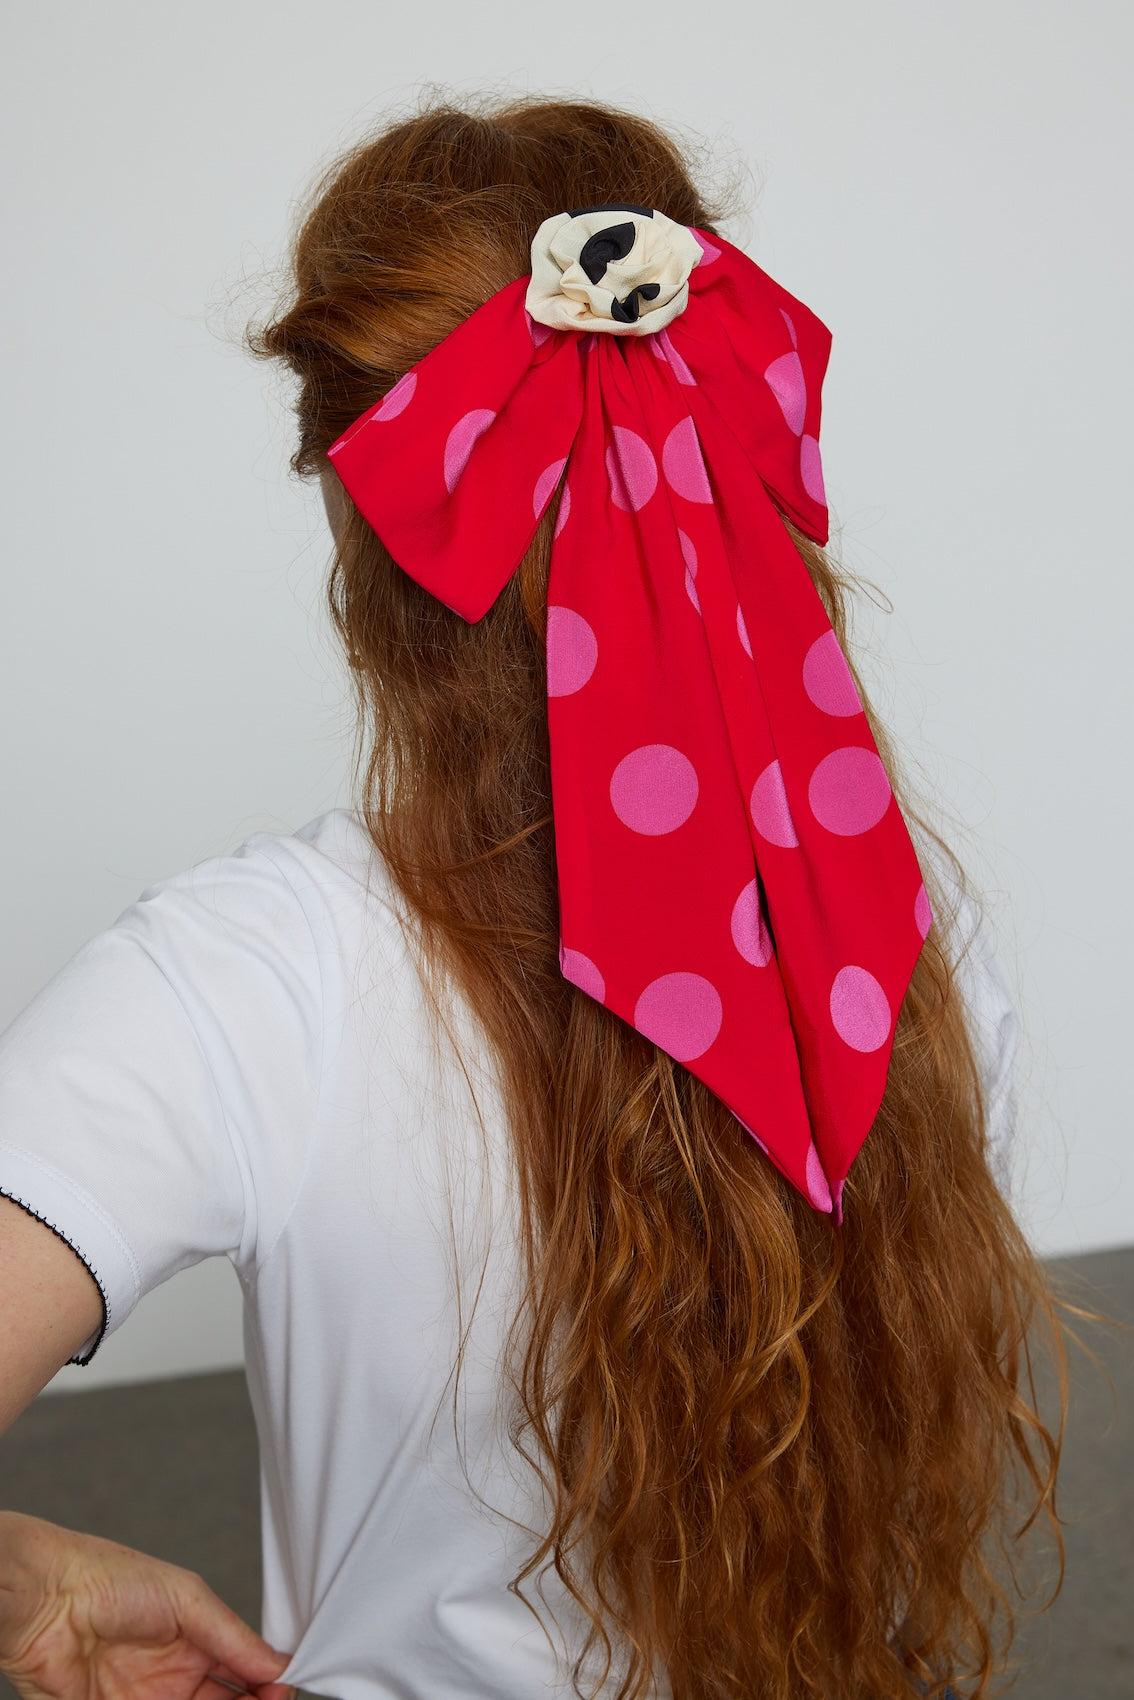 Caro Editions Caro Hair Bow in printed crepe de chine fabric featuring large polka dots. This is a statement hair accessory that elevates any outfit.